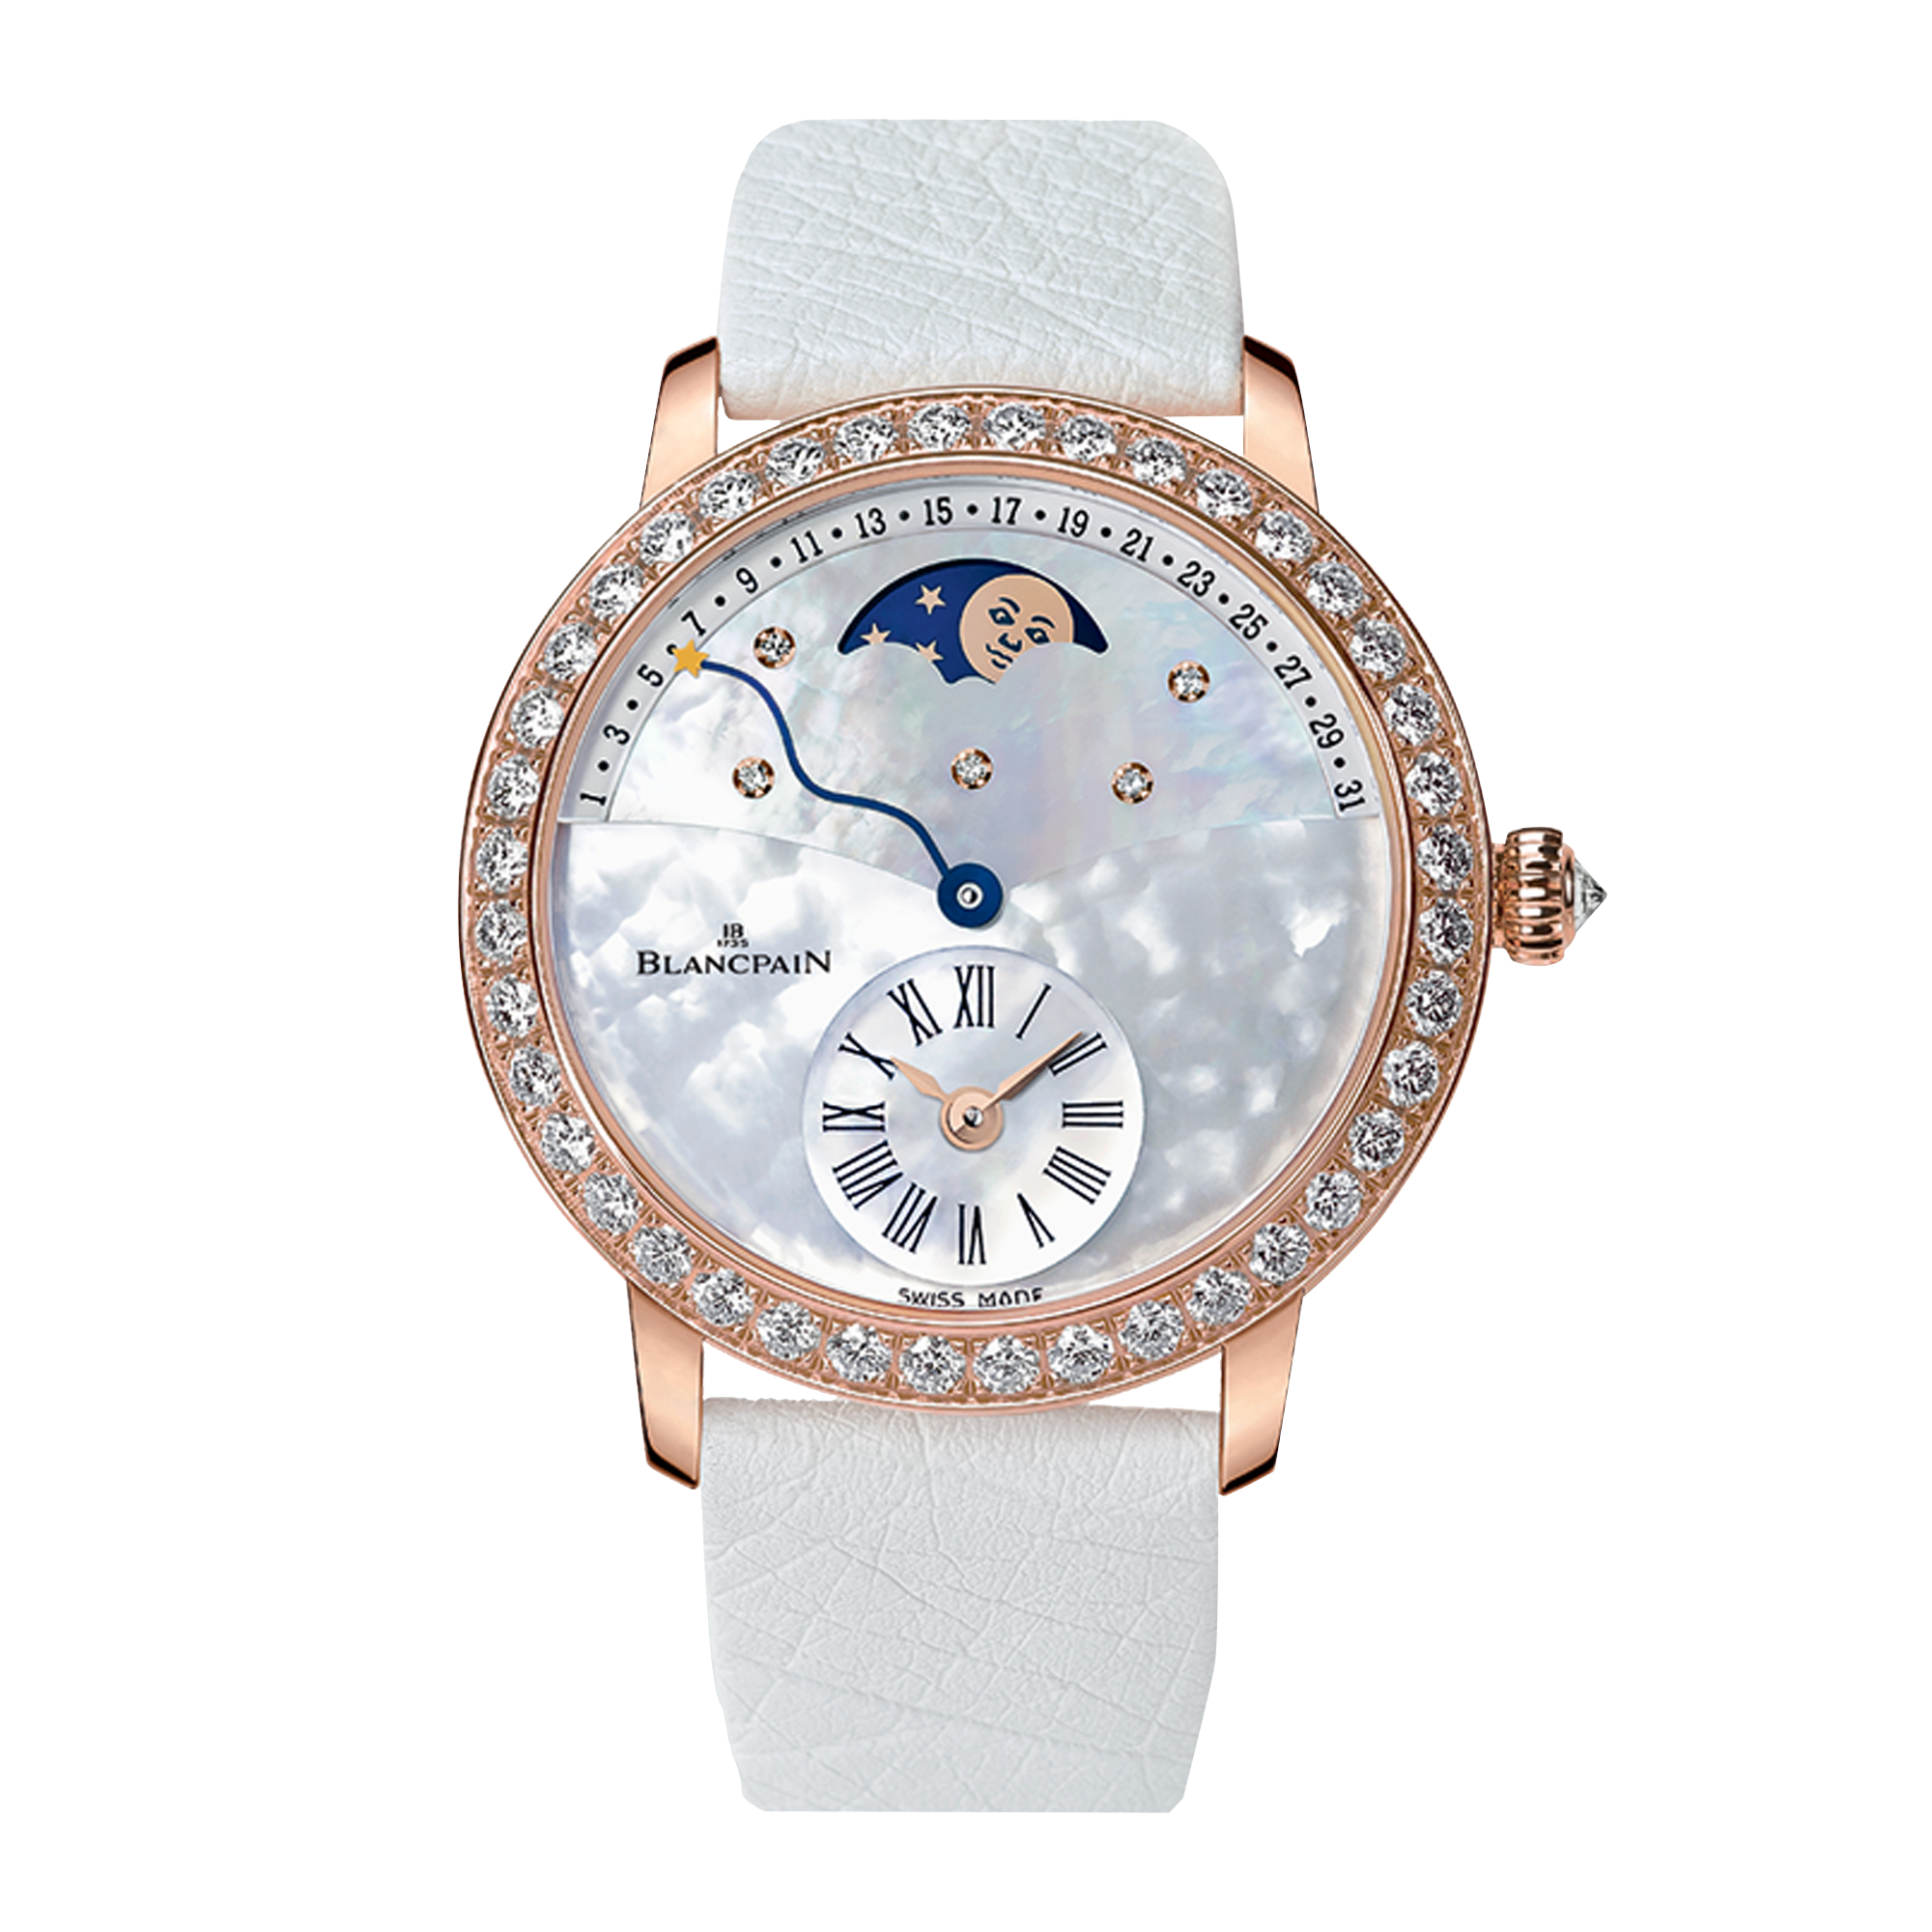 Blancpain Women 36mm, Mother of Pearl Dial, Arabic/Baton Numerals_1